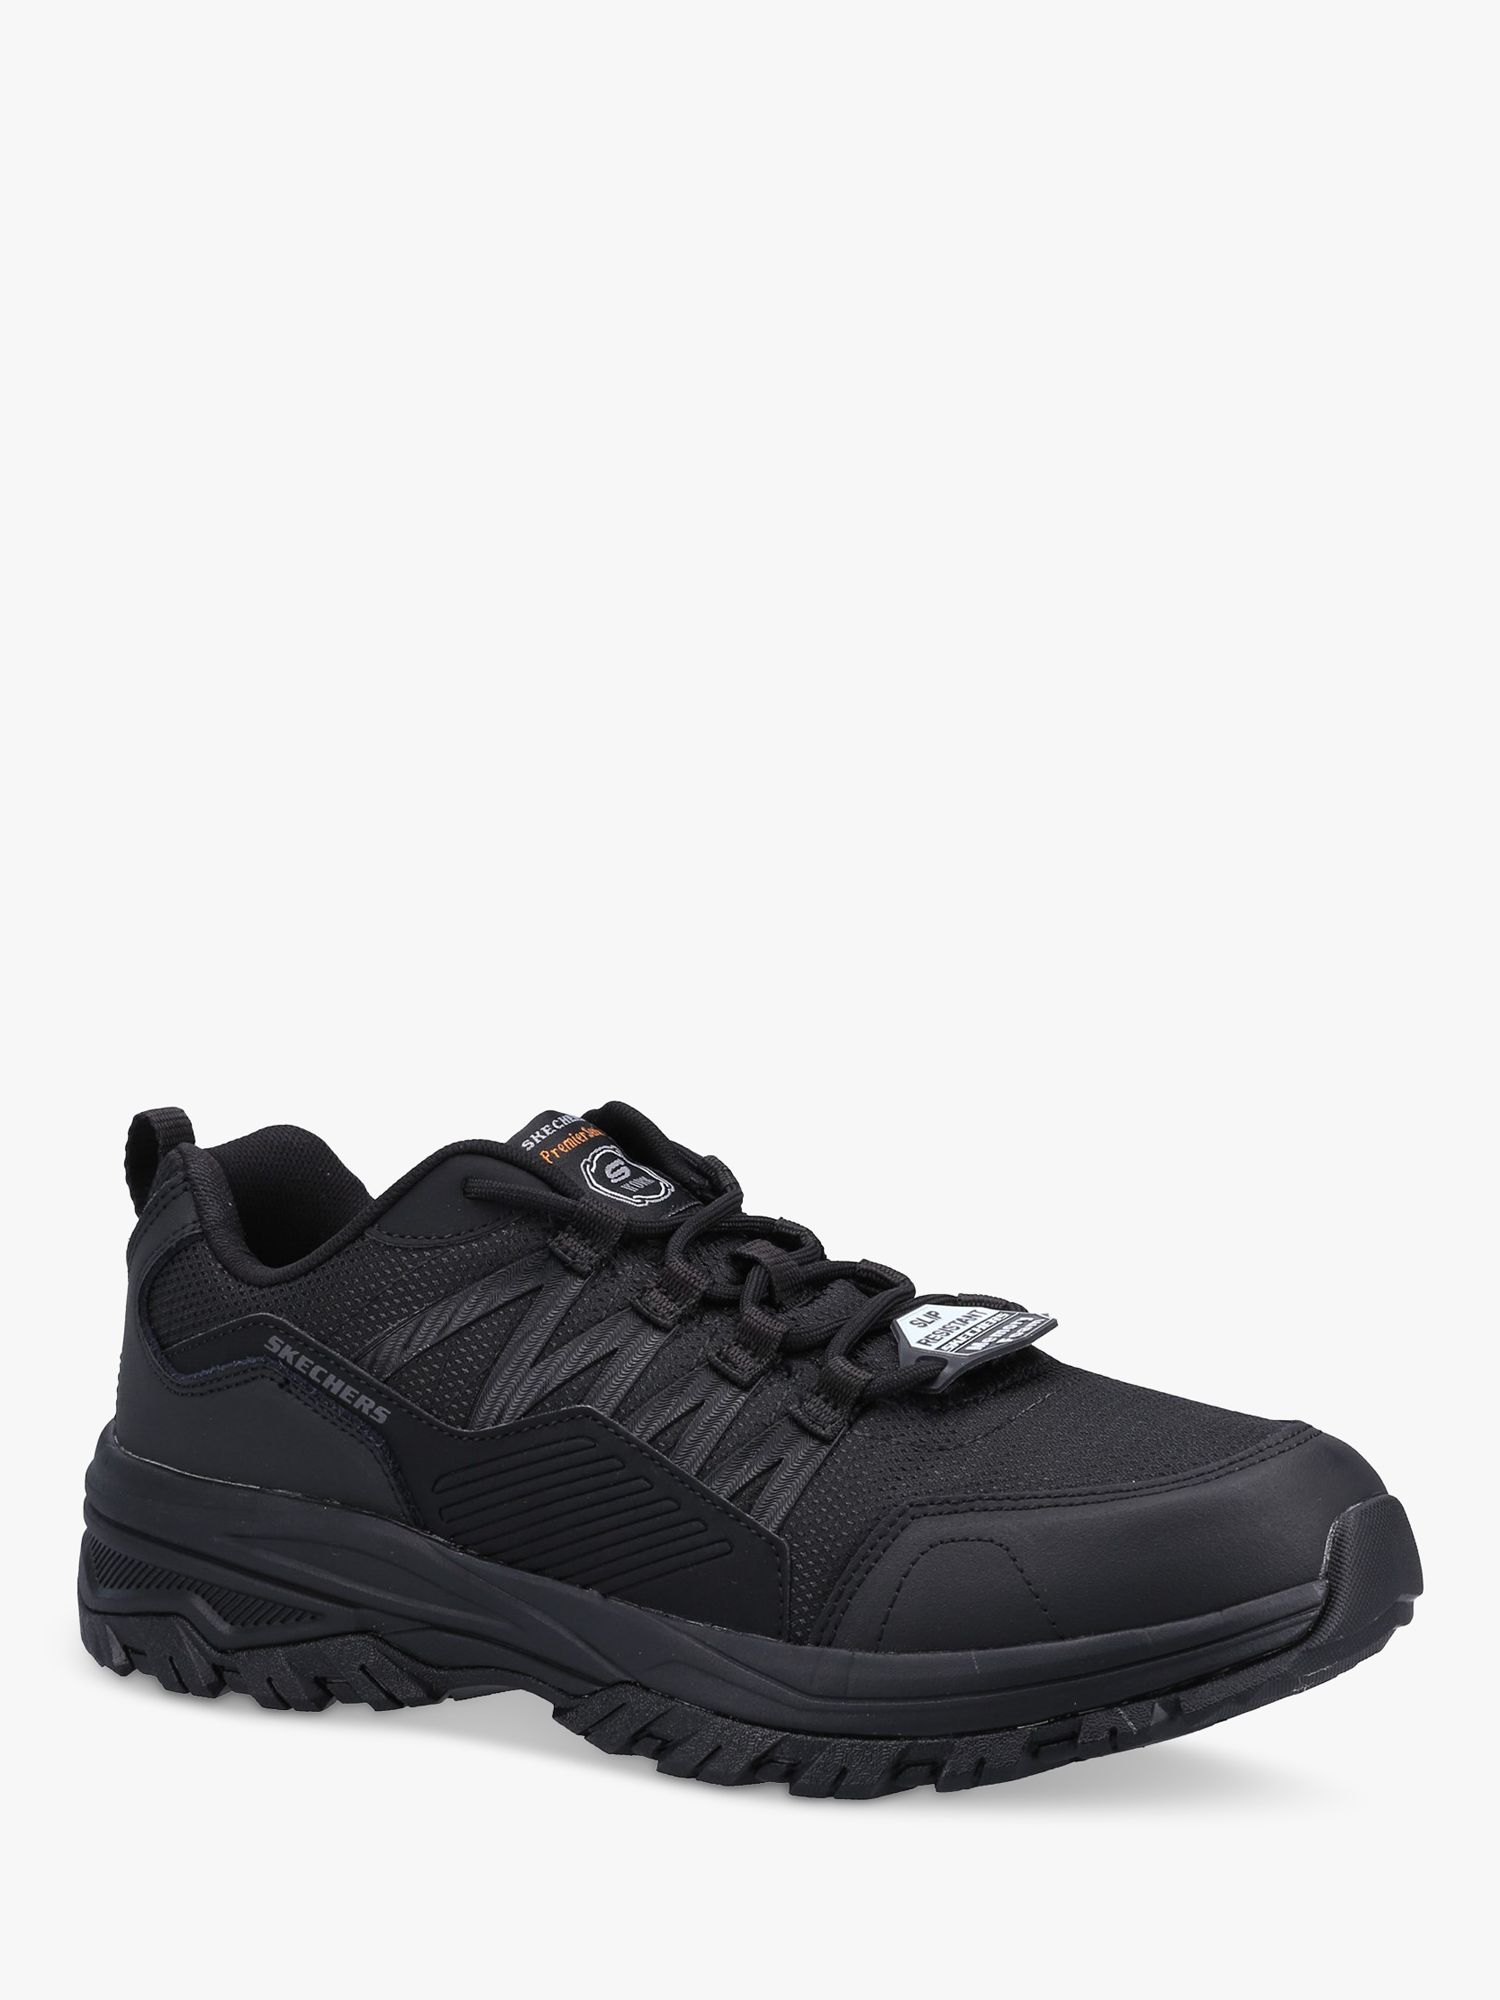 Skechers Fannter Leather Occupational Shoes, Black, 6